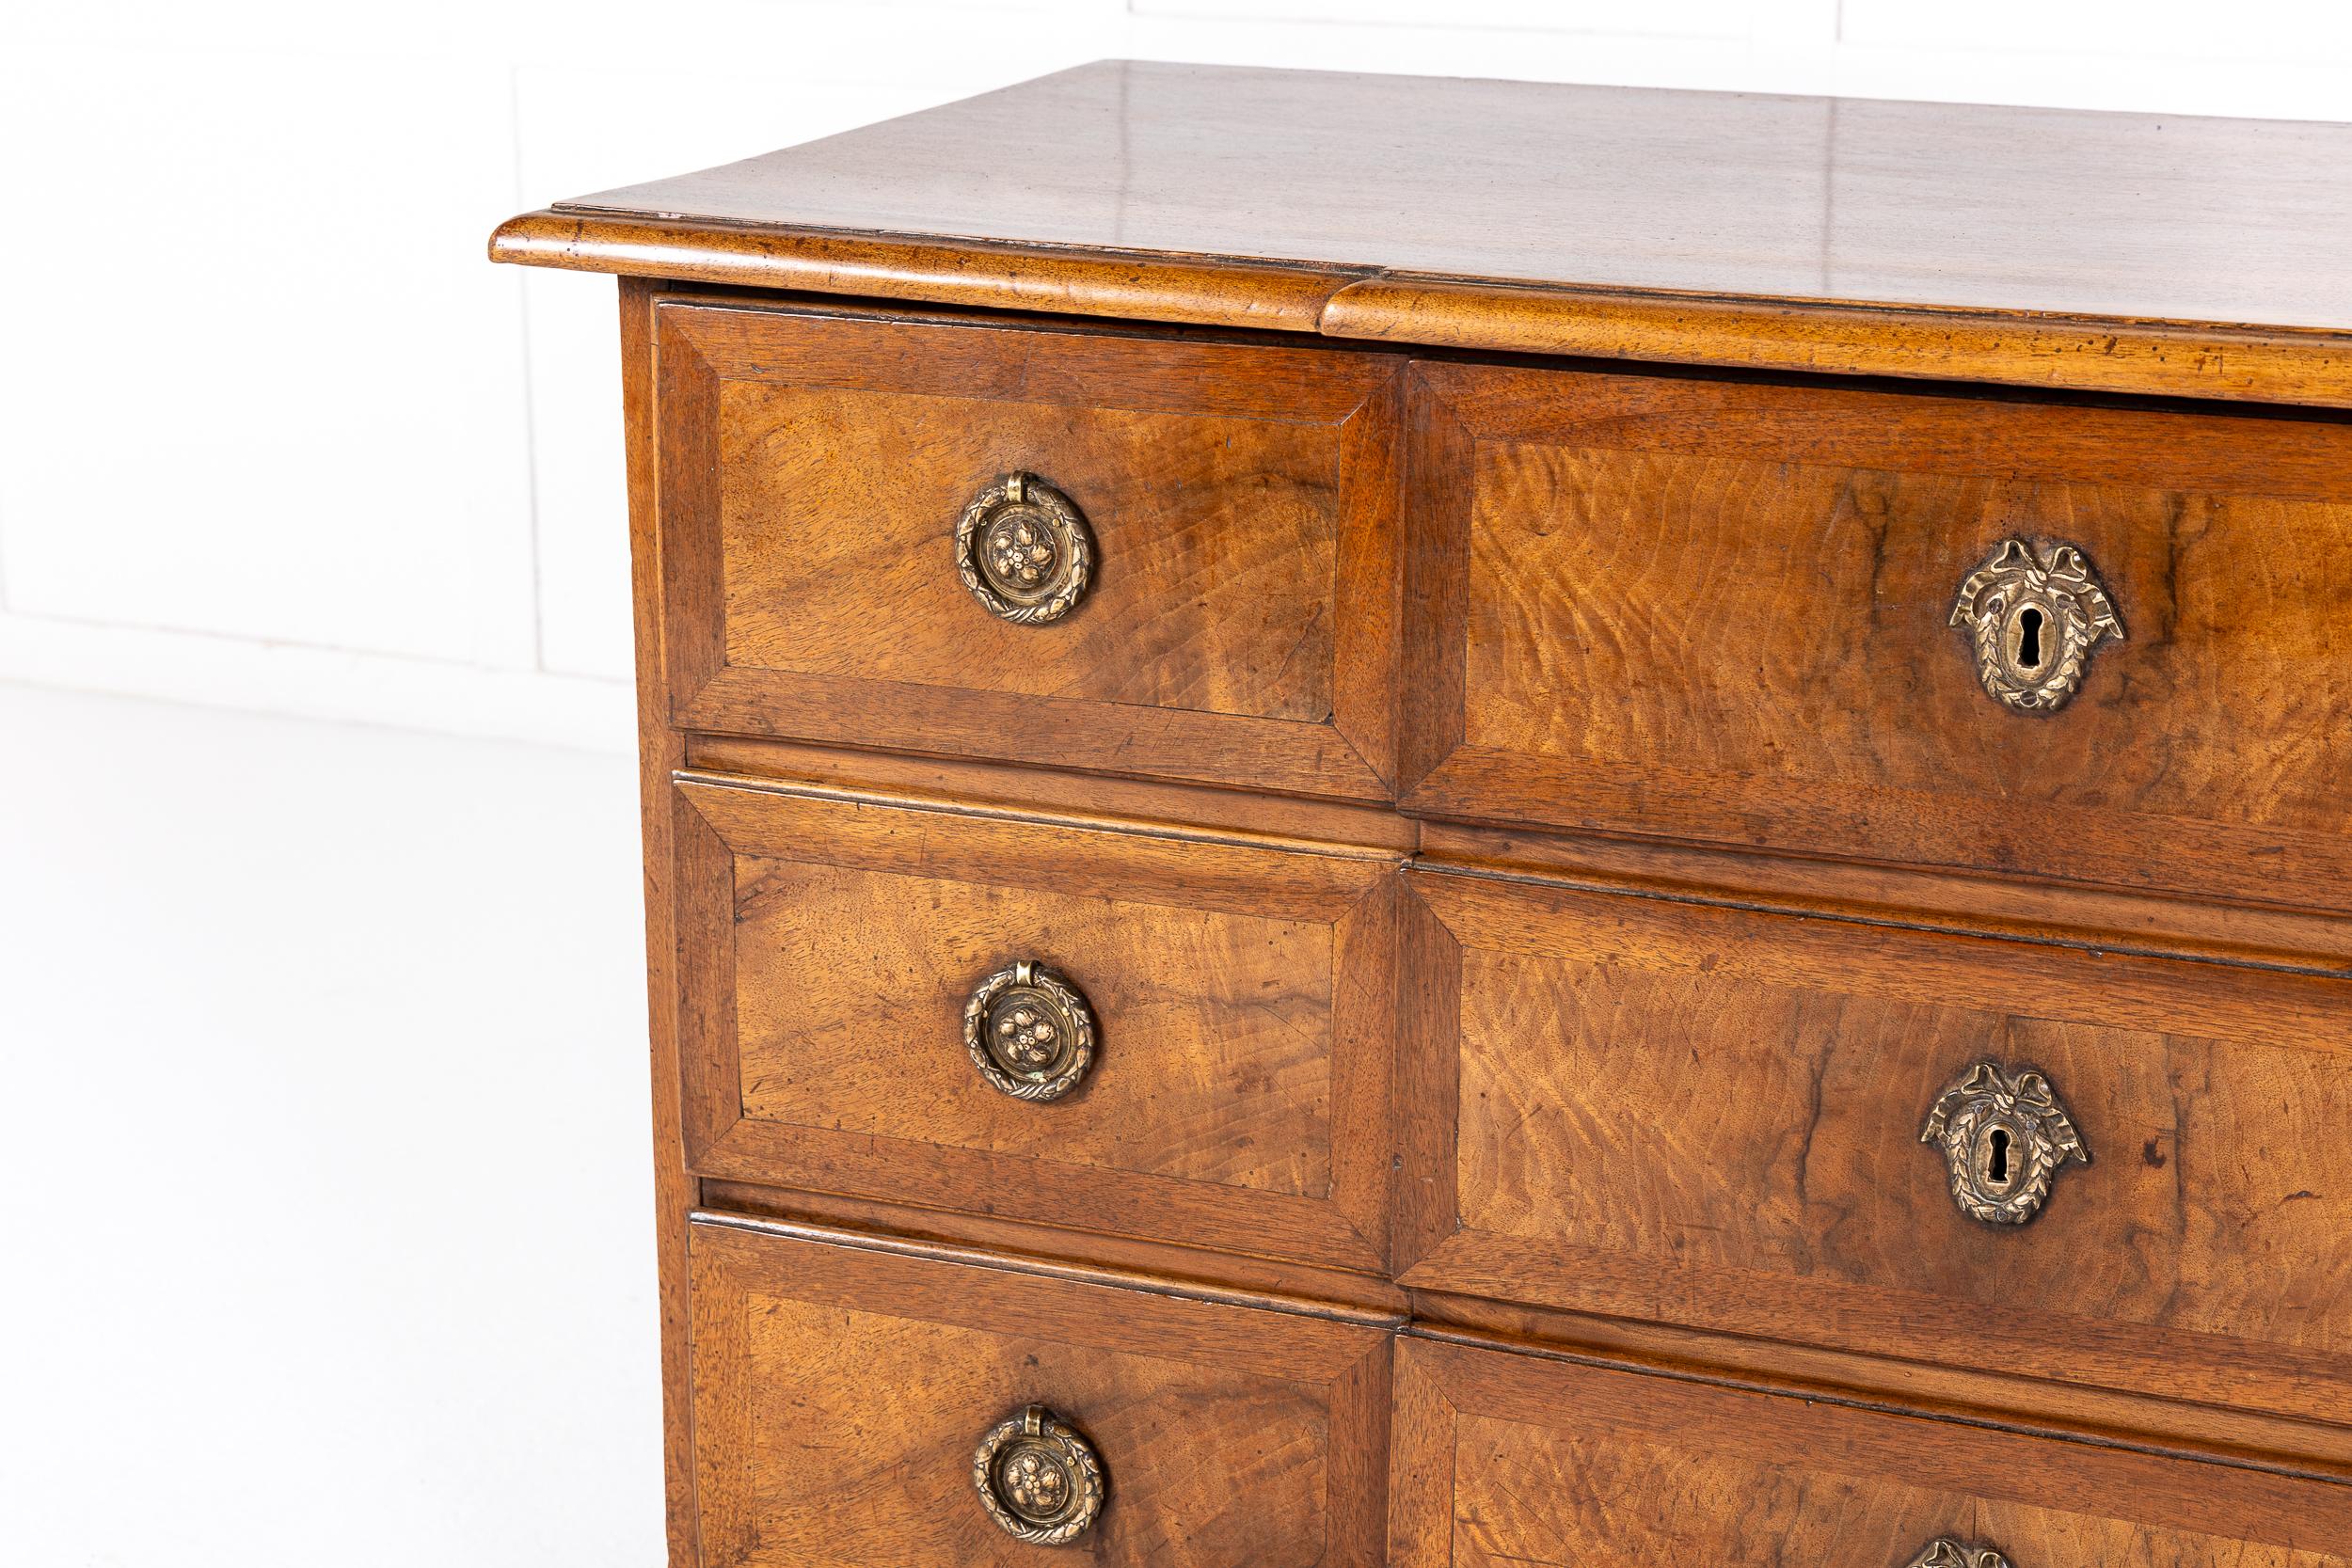 A Louis XVI Period French Walnut Commode of Excellent Colour.

This fine commode is of breakfront outline. Having three walnut crossbanded drawers with original metal handles and escutcheons. The commode has a frieze at the bottom of the breakfront